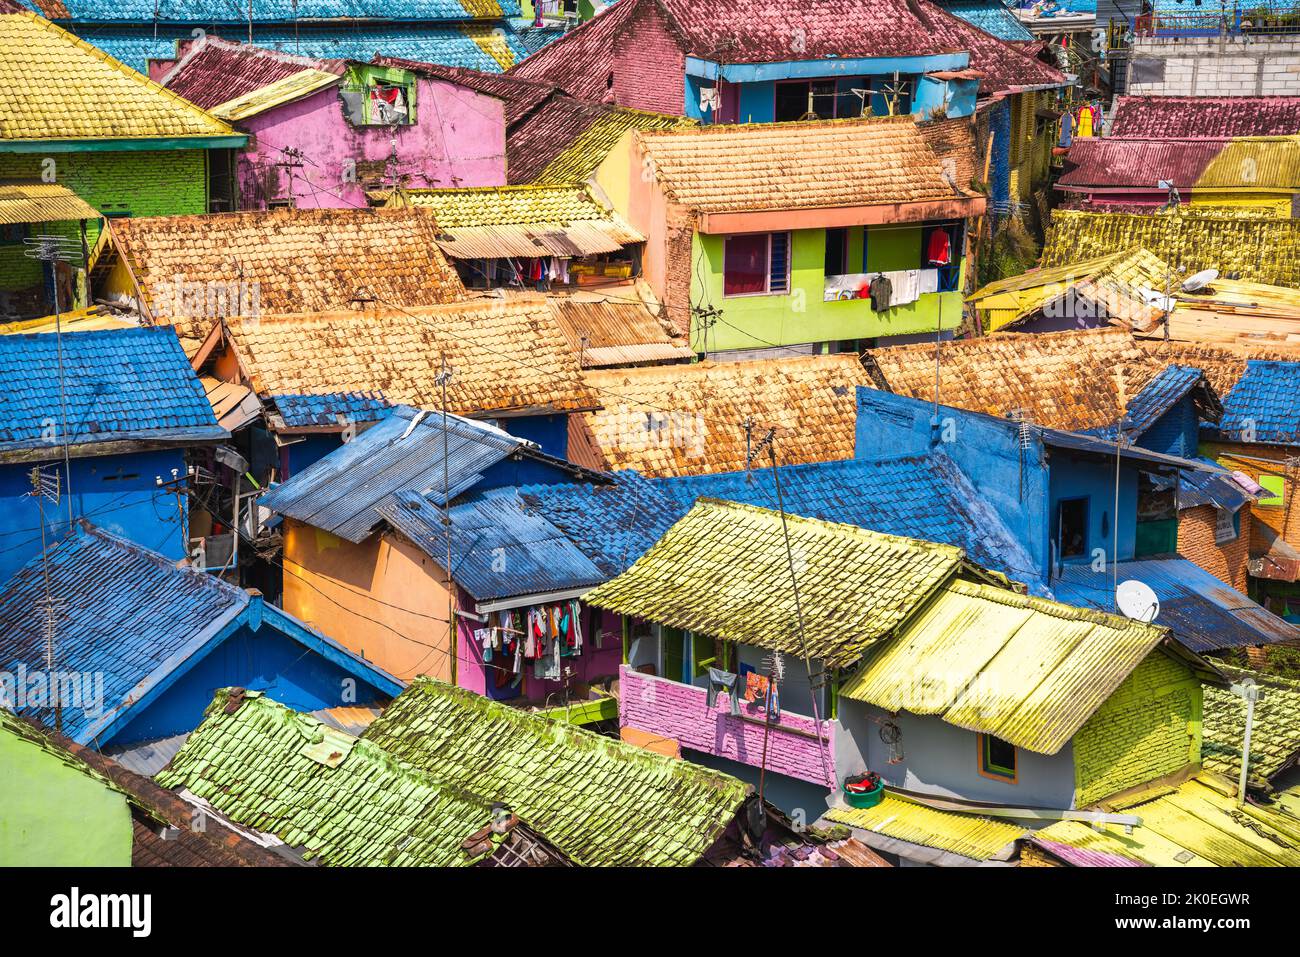 View of Kampung Jodipan, the Village of Color in Malang, Indonesia Stock Photo